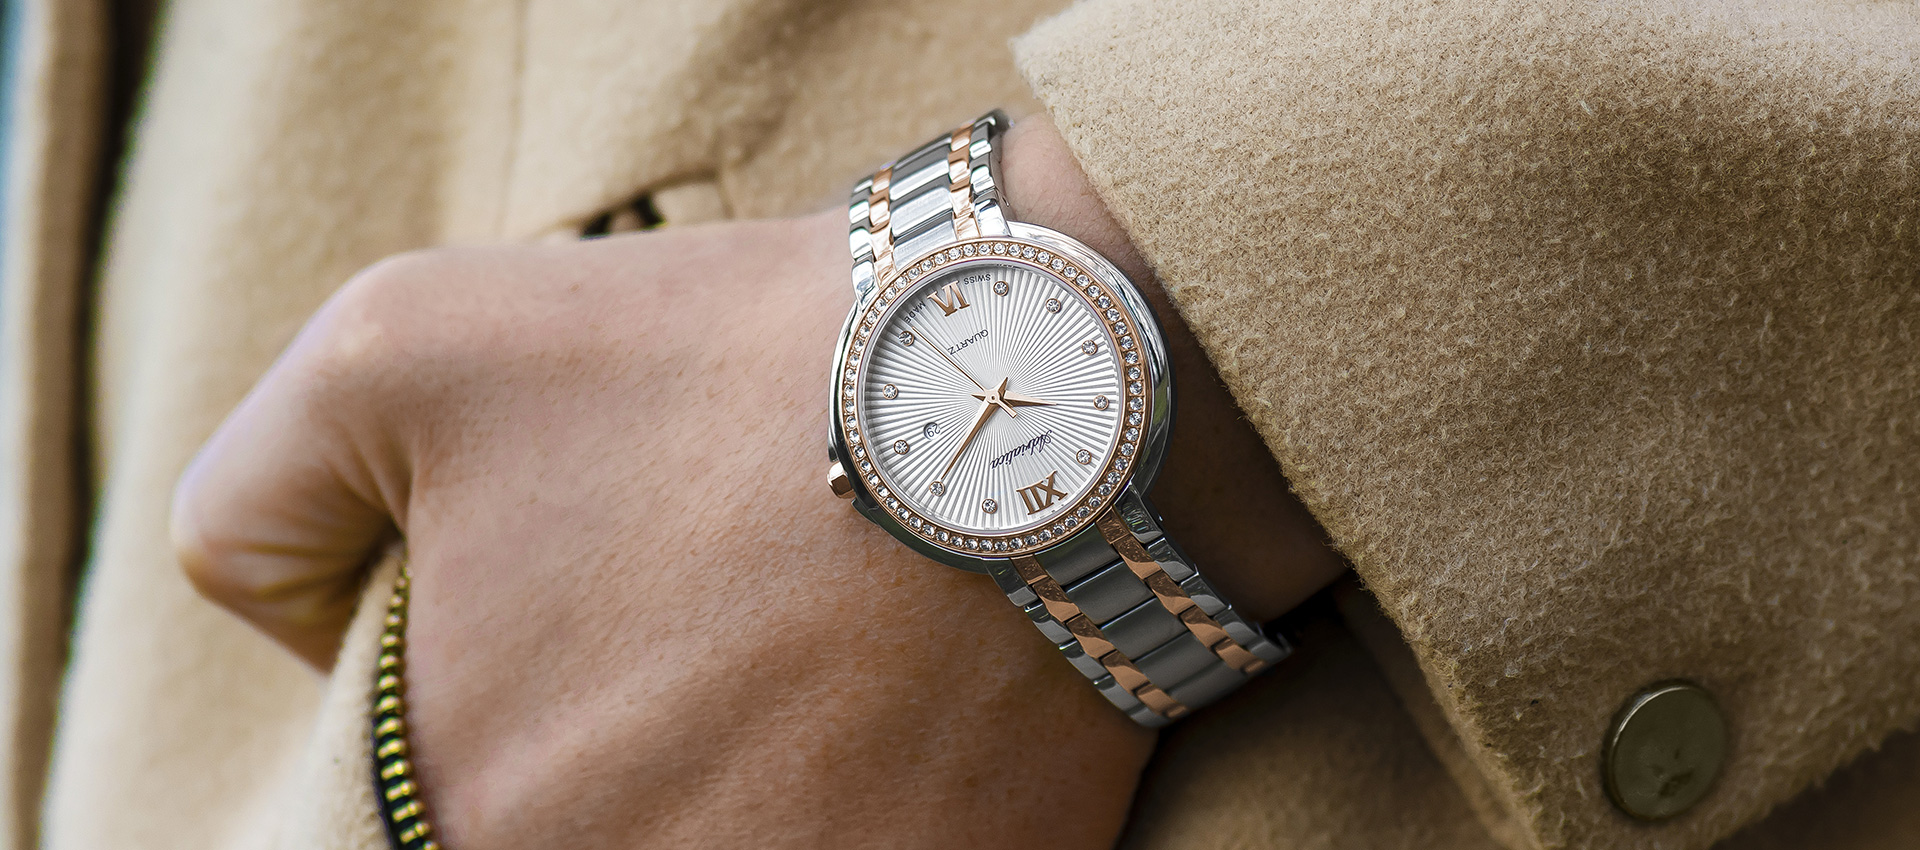 A Vintage-Inspired Oris Watch That Appeals to Everyone